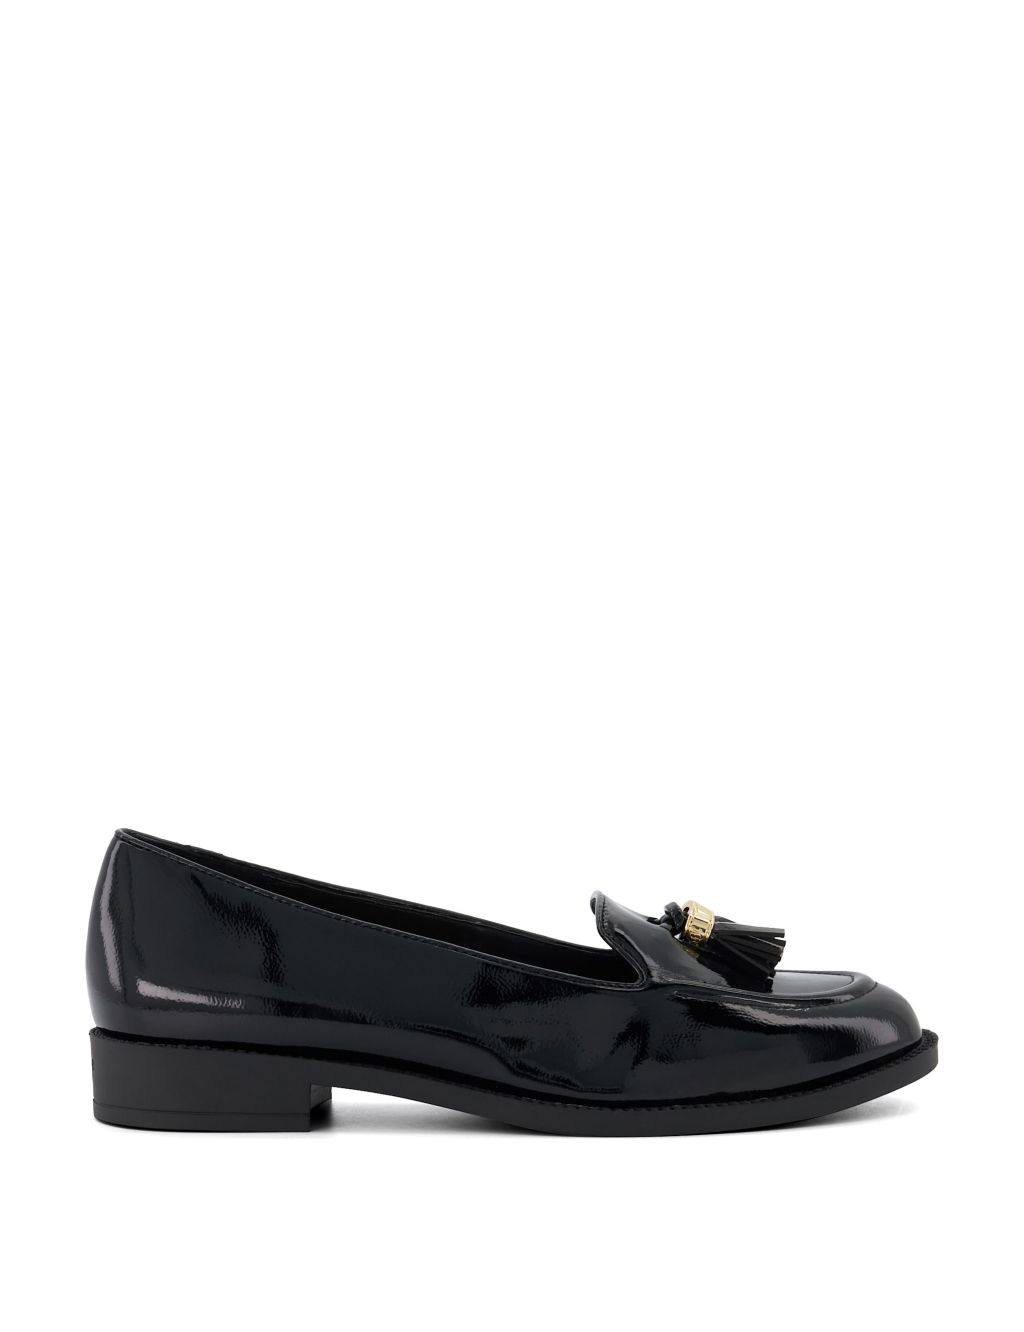 Wide Fit Patent Tassel Flat Loafers image 1